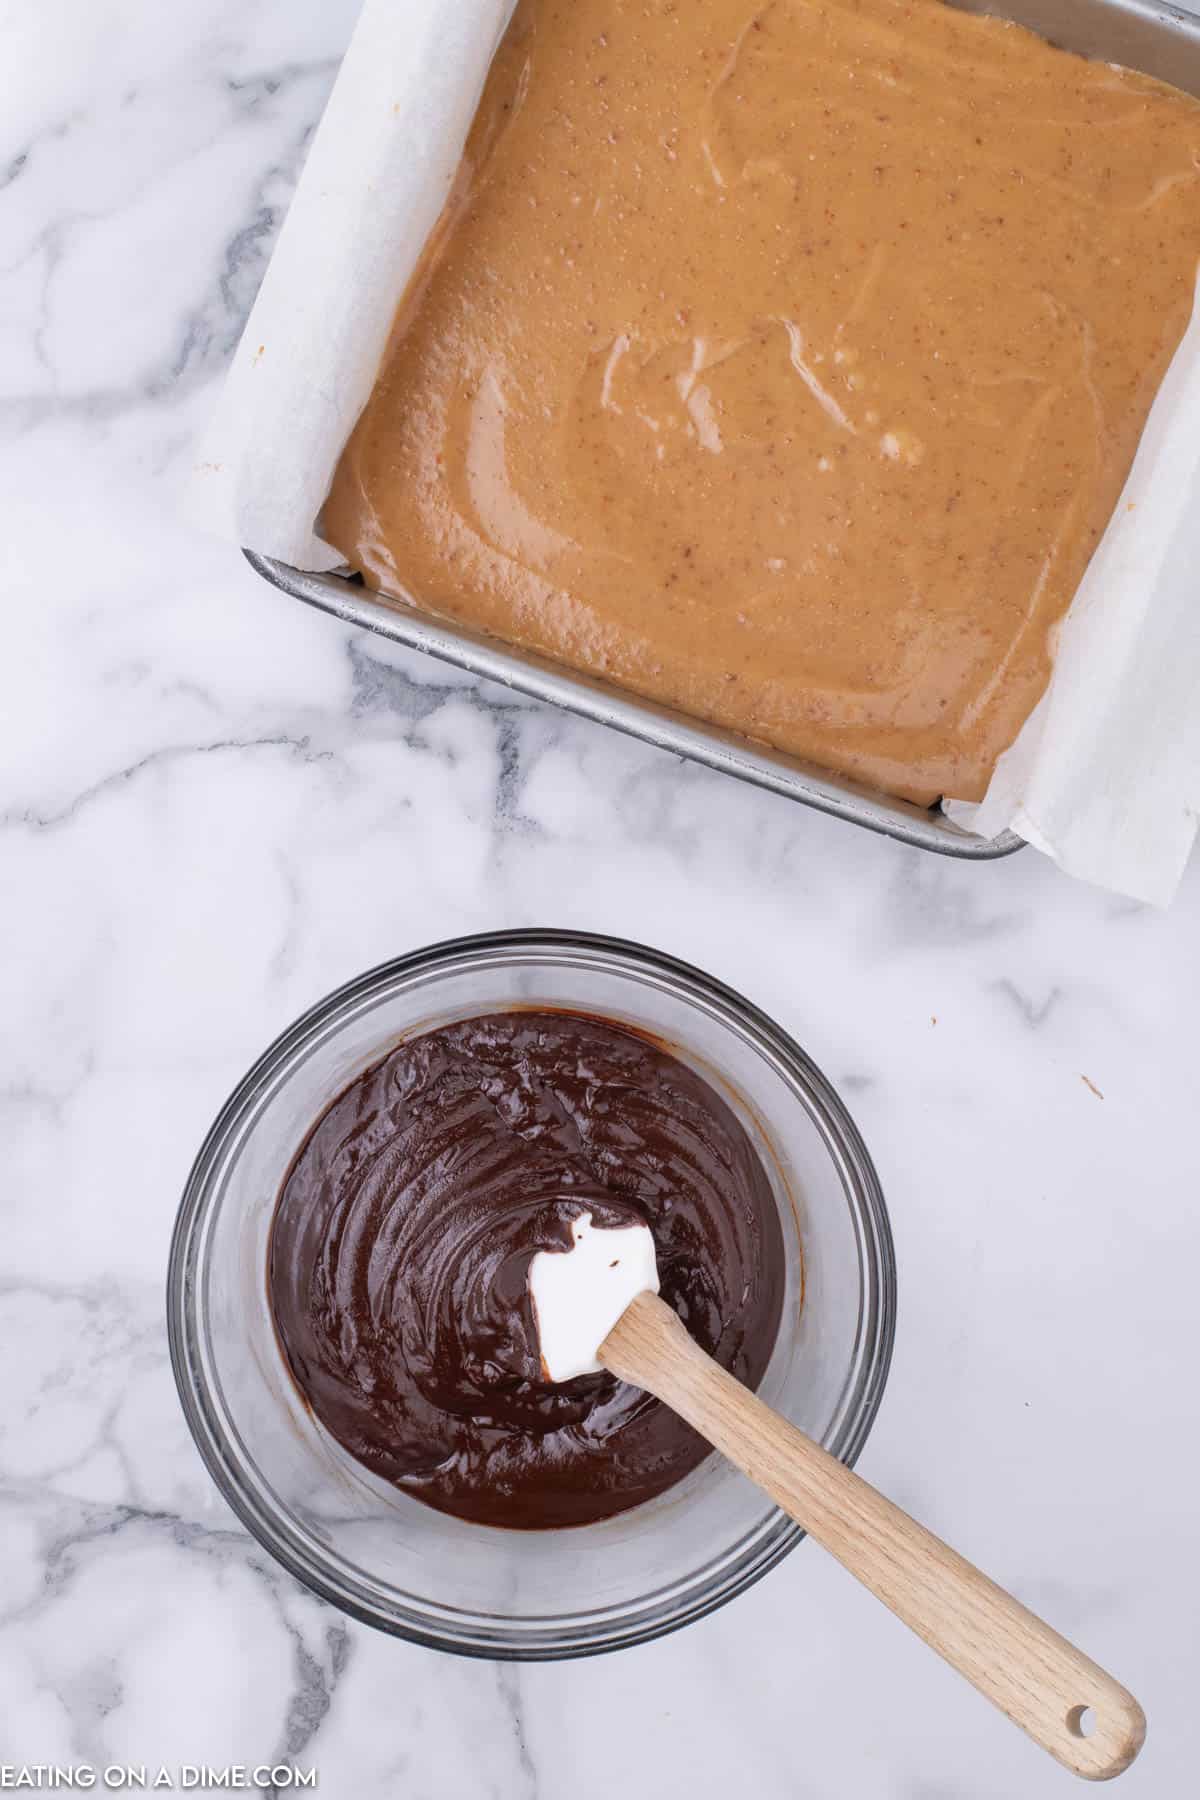 Melted chocolate in a bowl with a spatula and a baking dish with the caramel layer